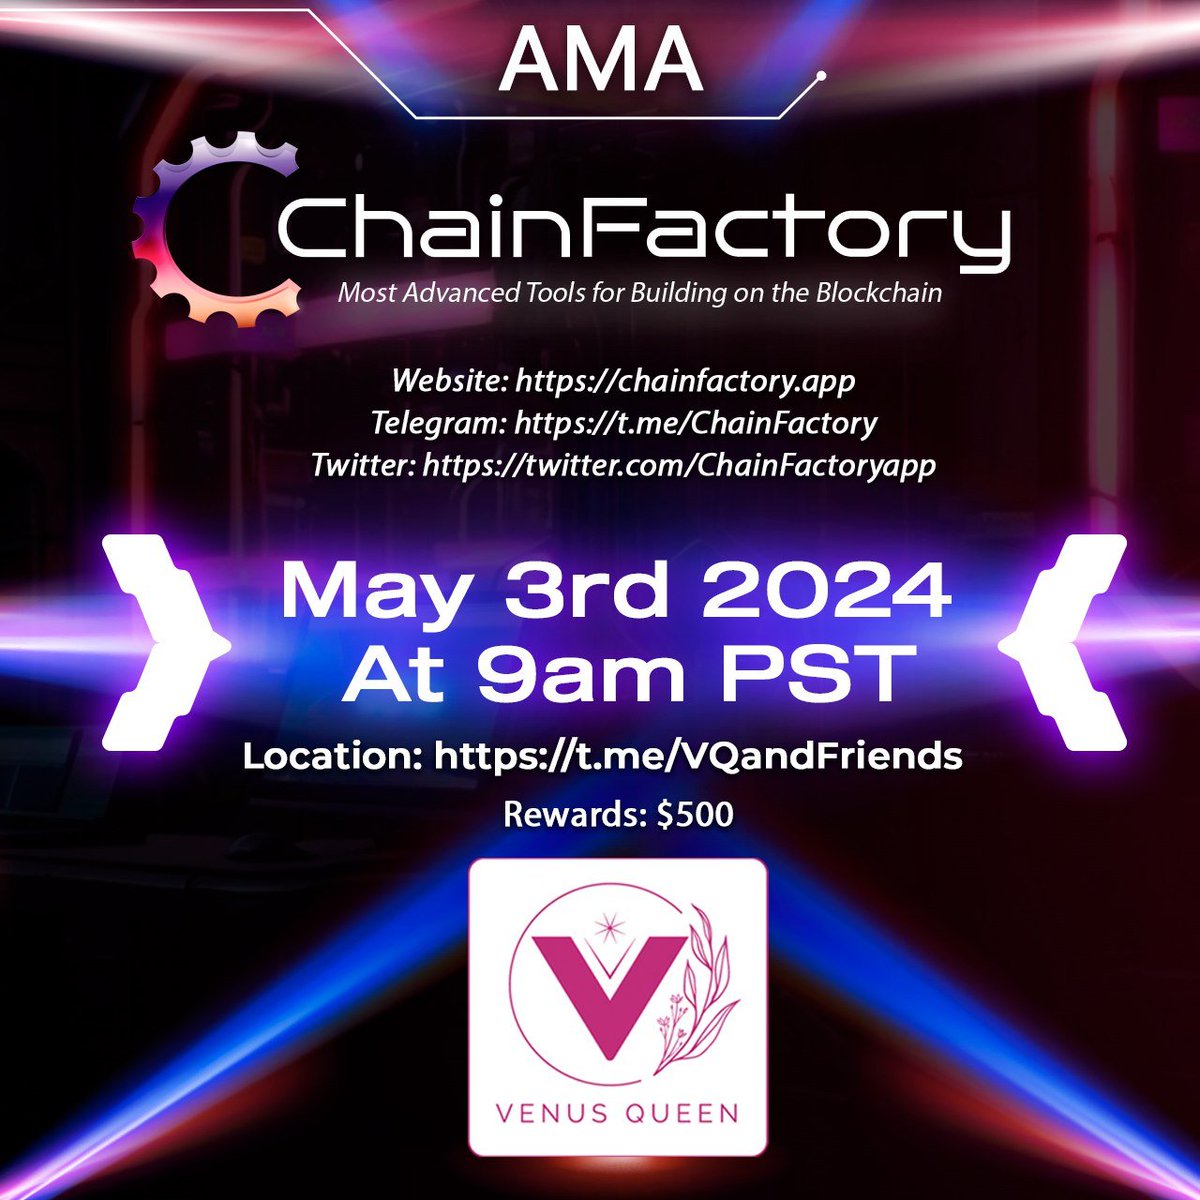 Please join us for an #AMA with #DeFi #AI undervalued gem called @ChainFactoryapp 

✅3 Million Market Cap.
✅Doxxed Team.
✅#AI #DeFi #NFTs #dApps product(s).
✅Over 250+ projects already used #ChainFactory #dApps 

#ChainFactory is the most advanced blockchain software and…